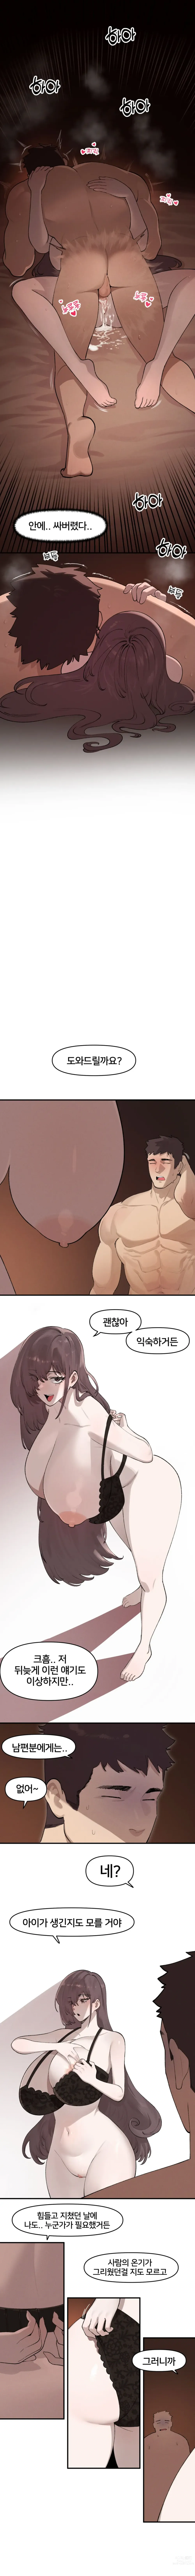 Page 7 of doujinshi Lady Next Door (uncensored)